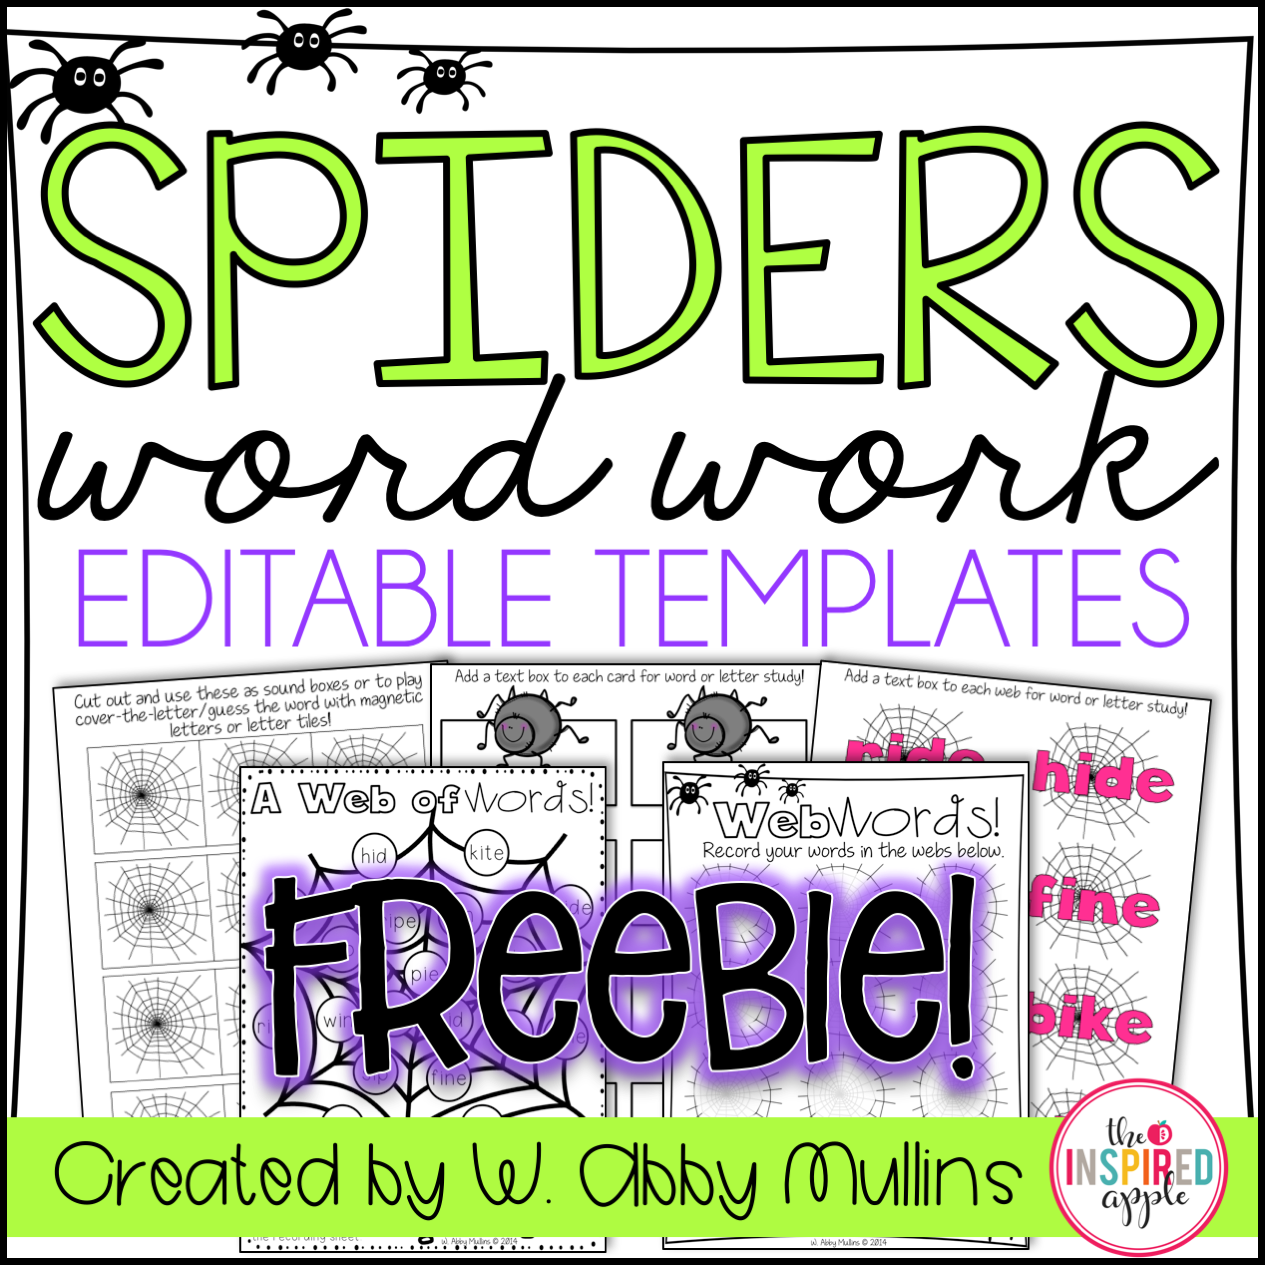 This is a FREE set of editable, spider-themed word work activities perfect for kindergarten, first grade, or second grade!